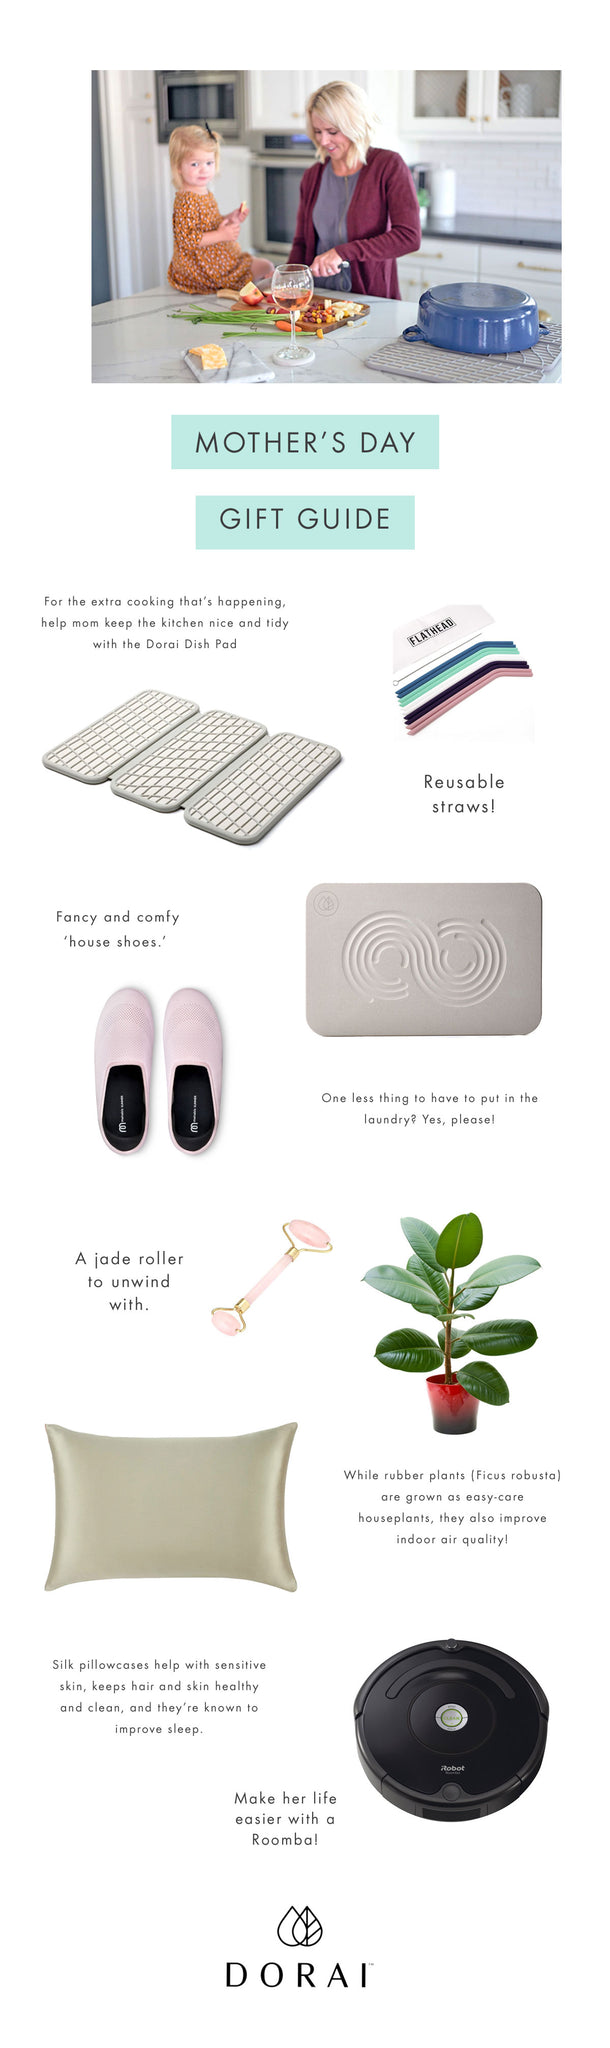 Dorai Home Mother's Day gift guide